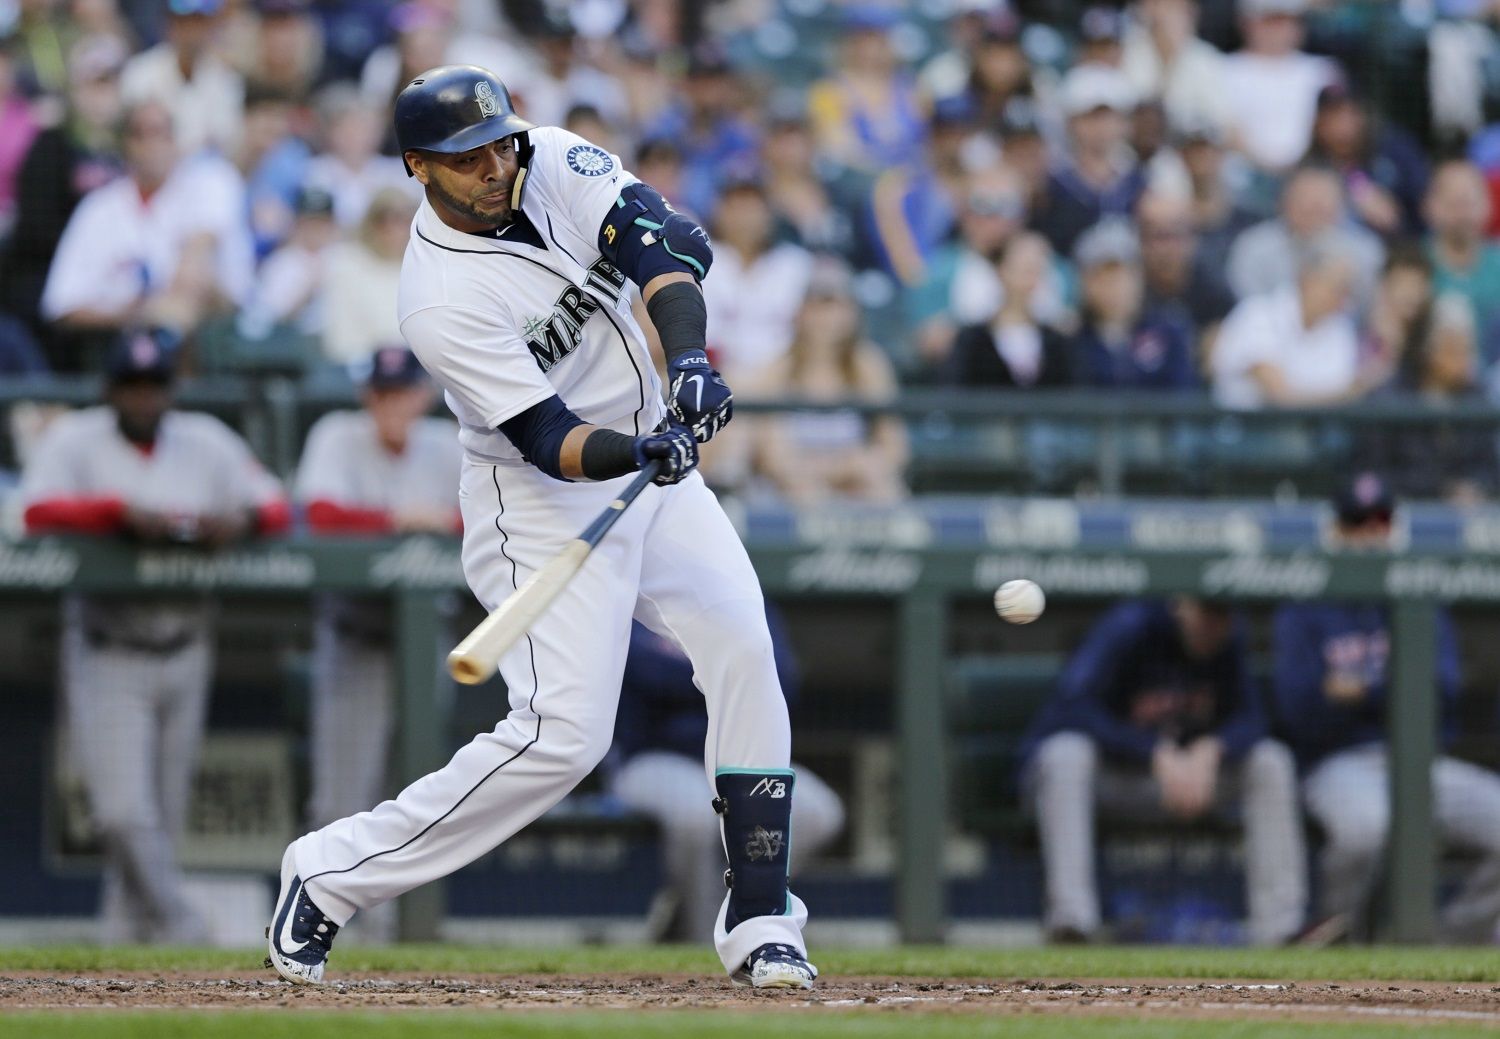 Seattle Mariners' Nelson Cruz hits an RBI single against the Boston Red Sox during the third inning of a baseball game Saturday, June 16, 2018, in Seattle. (AP Photo/John Froschauer)